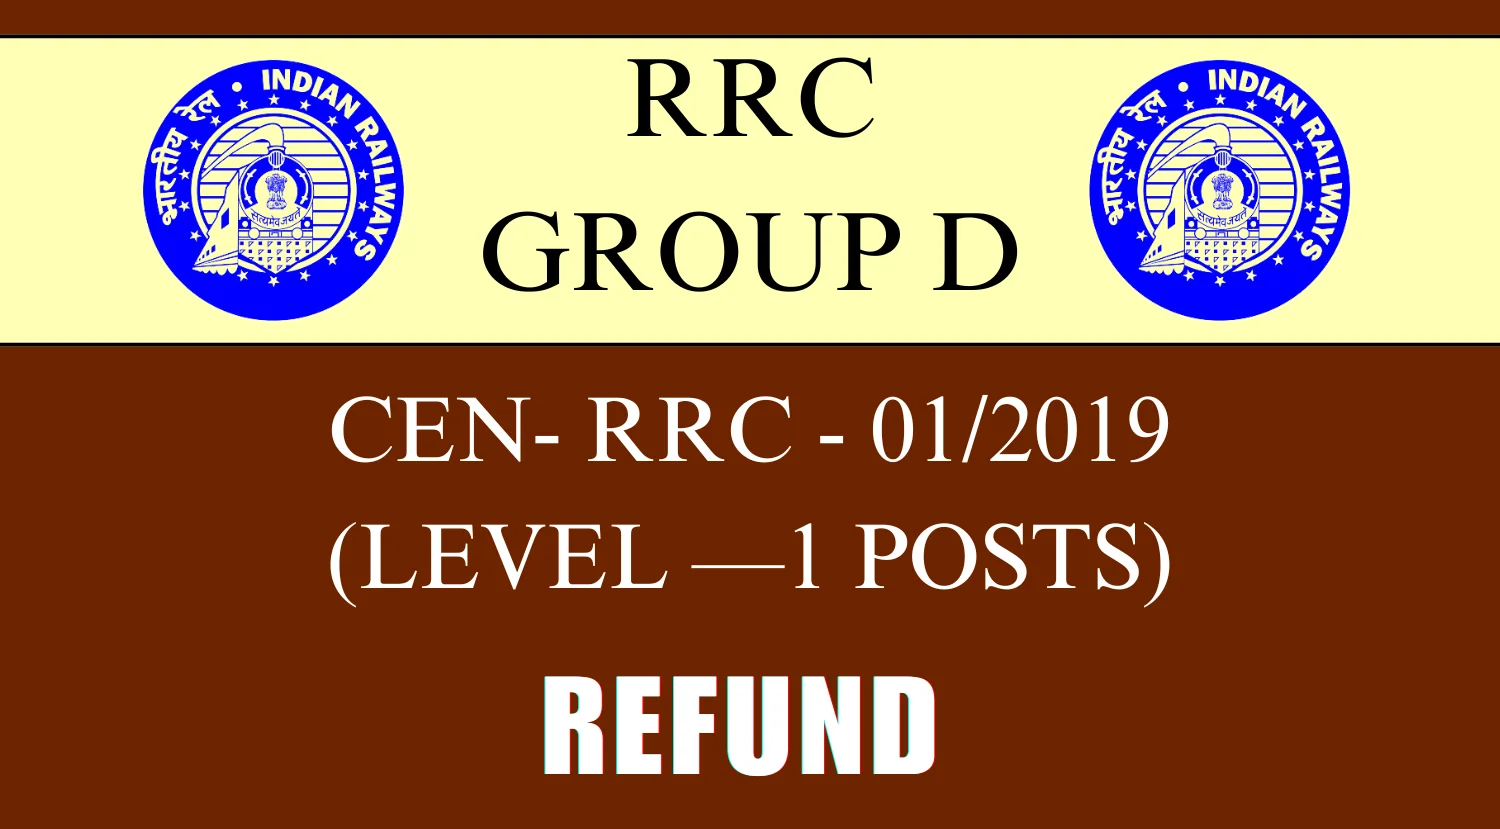 RRC GROUP D Recruitment Refund Notice Released, Apply for Fees Refund till 5th May